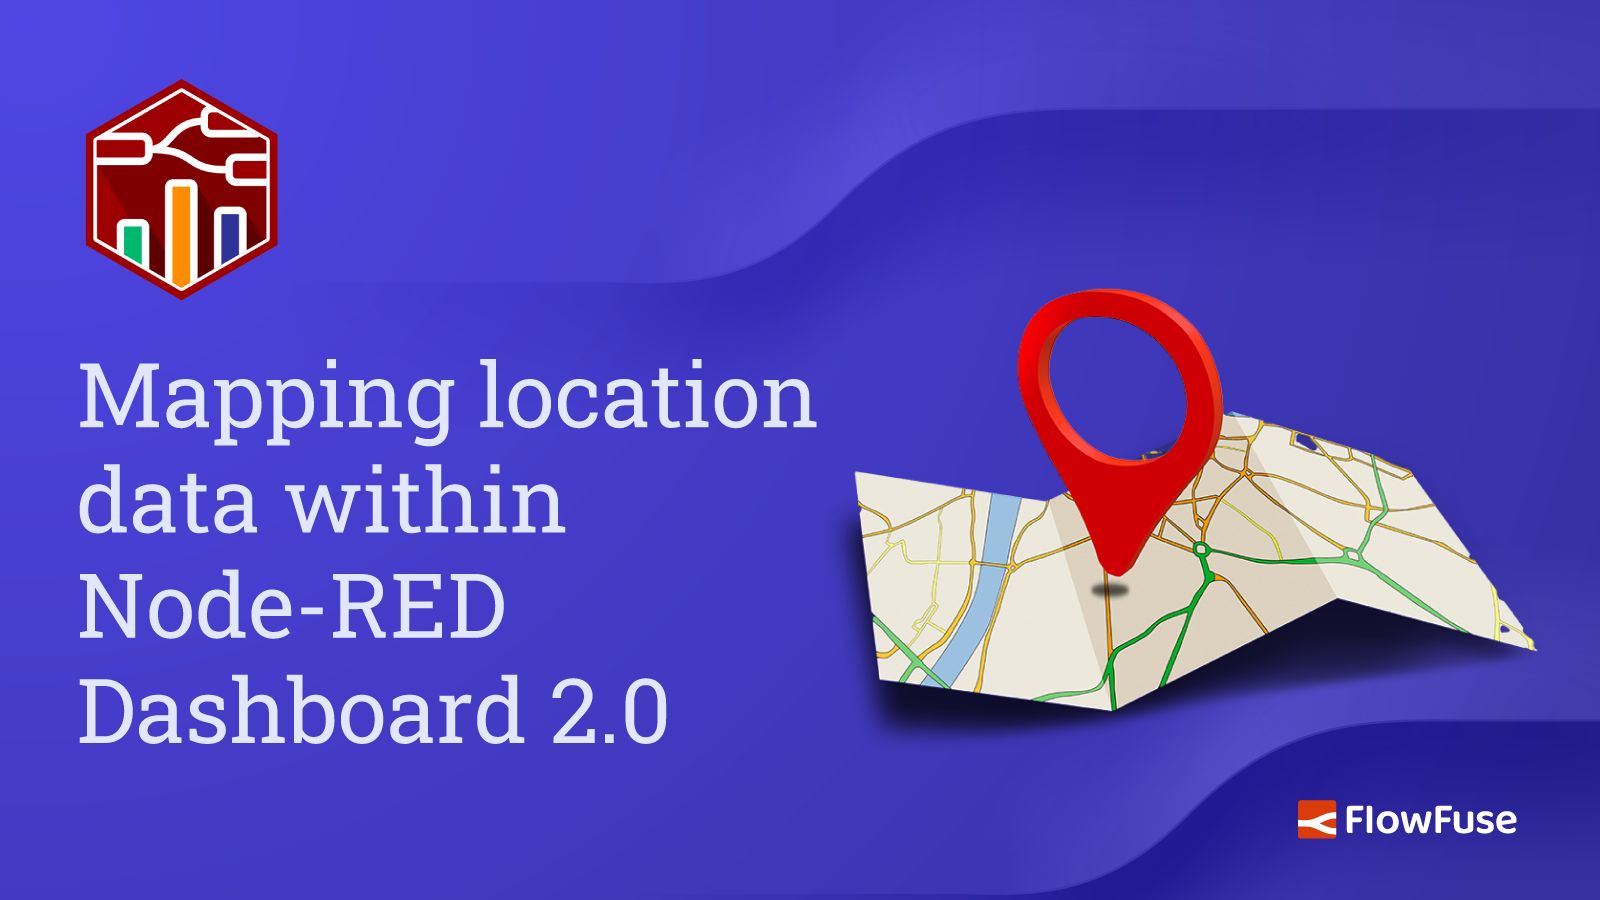 Image representing Mapping location data within Node-RED Dashboard 2.0.